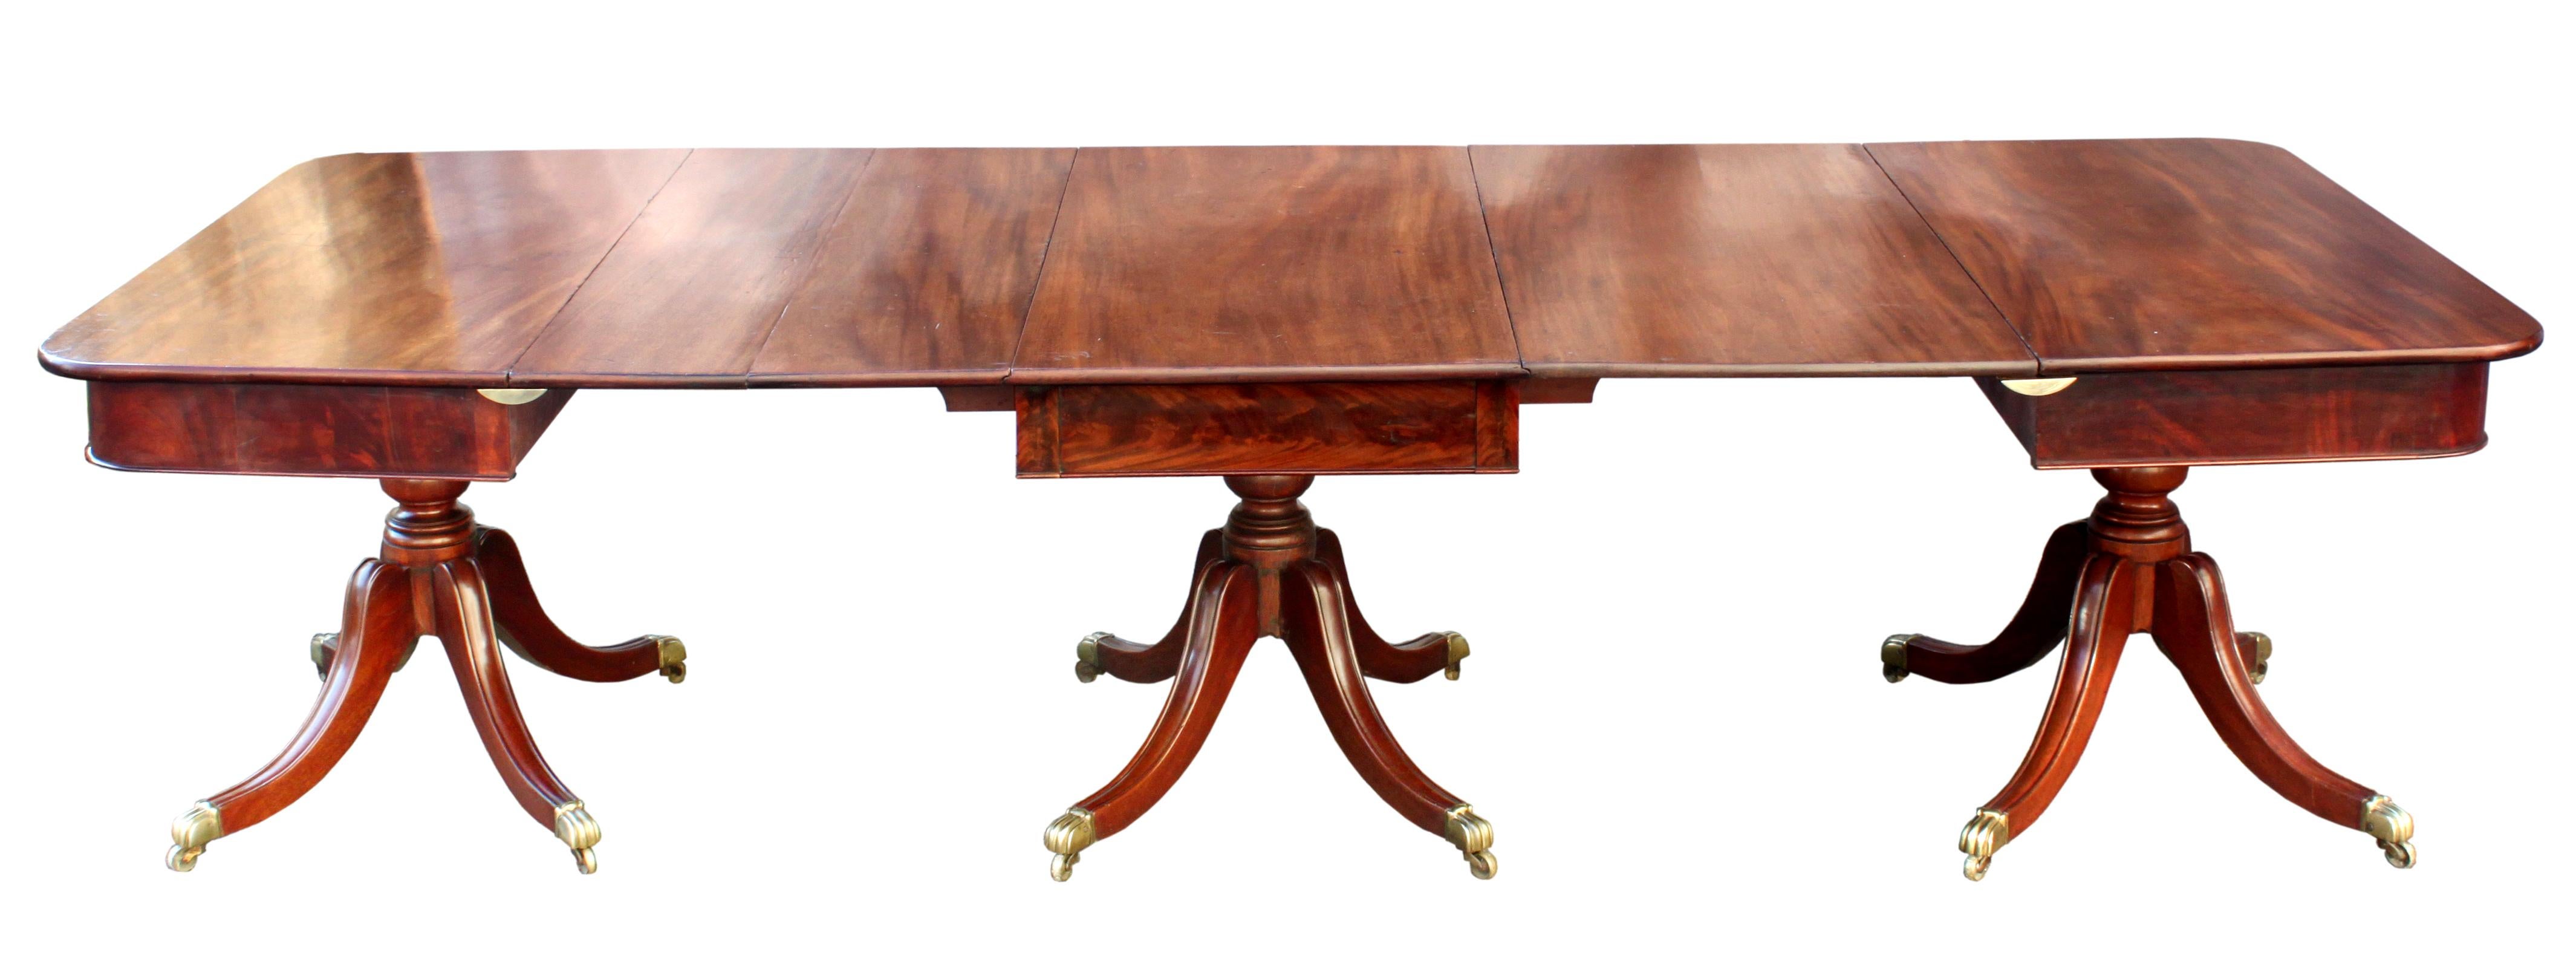 An attractive Regency dining table in figured mahogany, the veneered frieze above three elegant 4 splay bases: handsome turned pillars and sabre legs with carved moulded tops and the original brass sabot castors of a similar moulded design. Folding